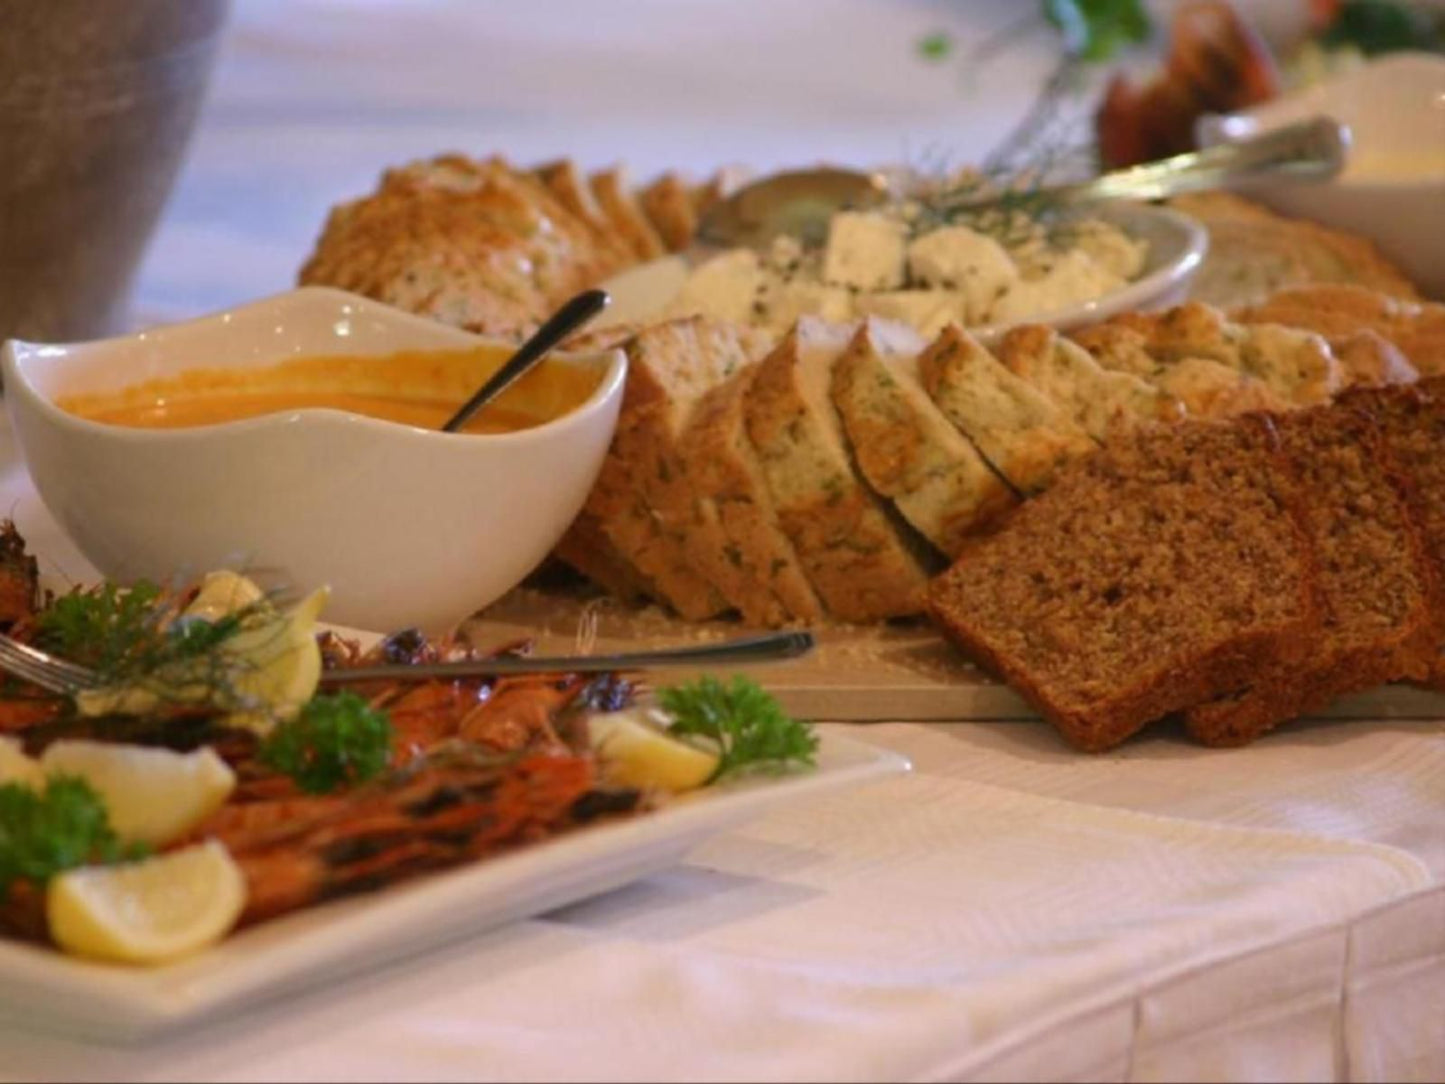 Draaihoek Lodge And Restaurant Elands Bay Western Cape South Africa Bread, Bakery Product, Food